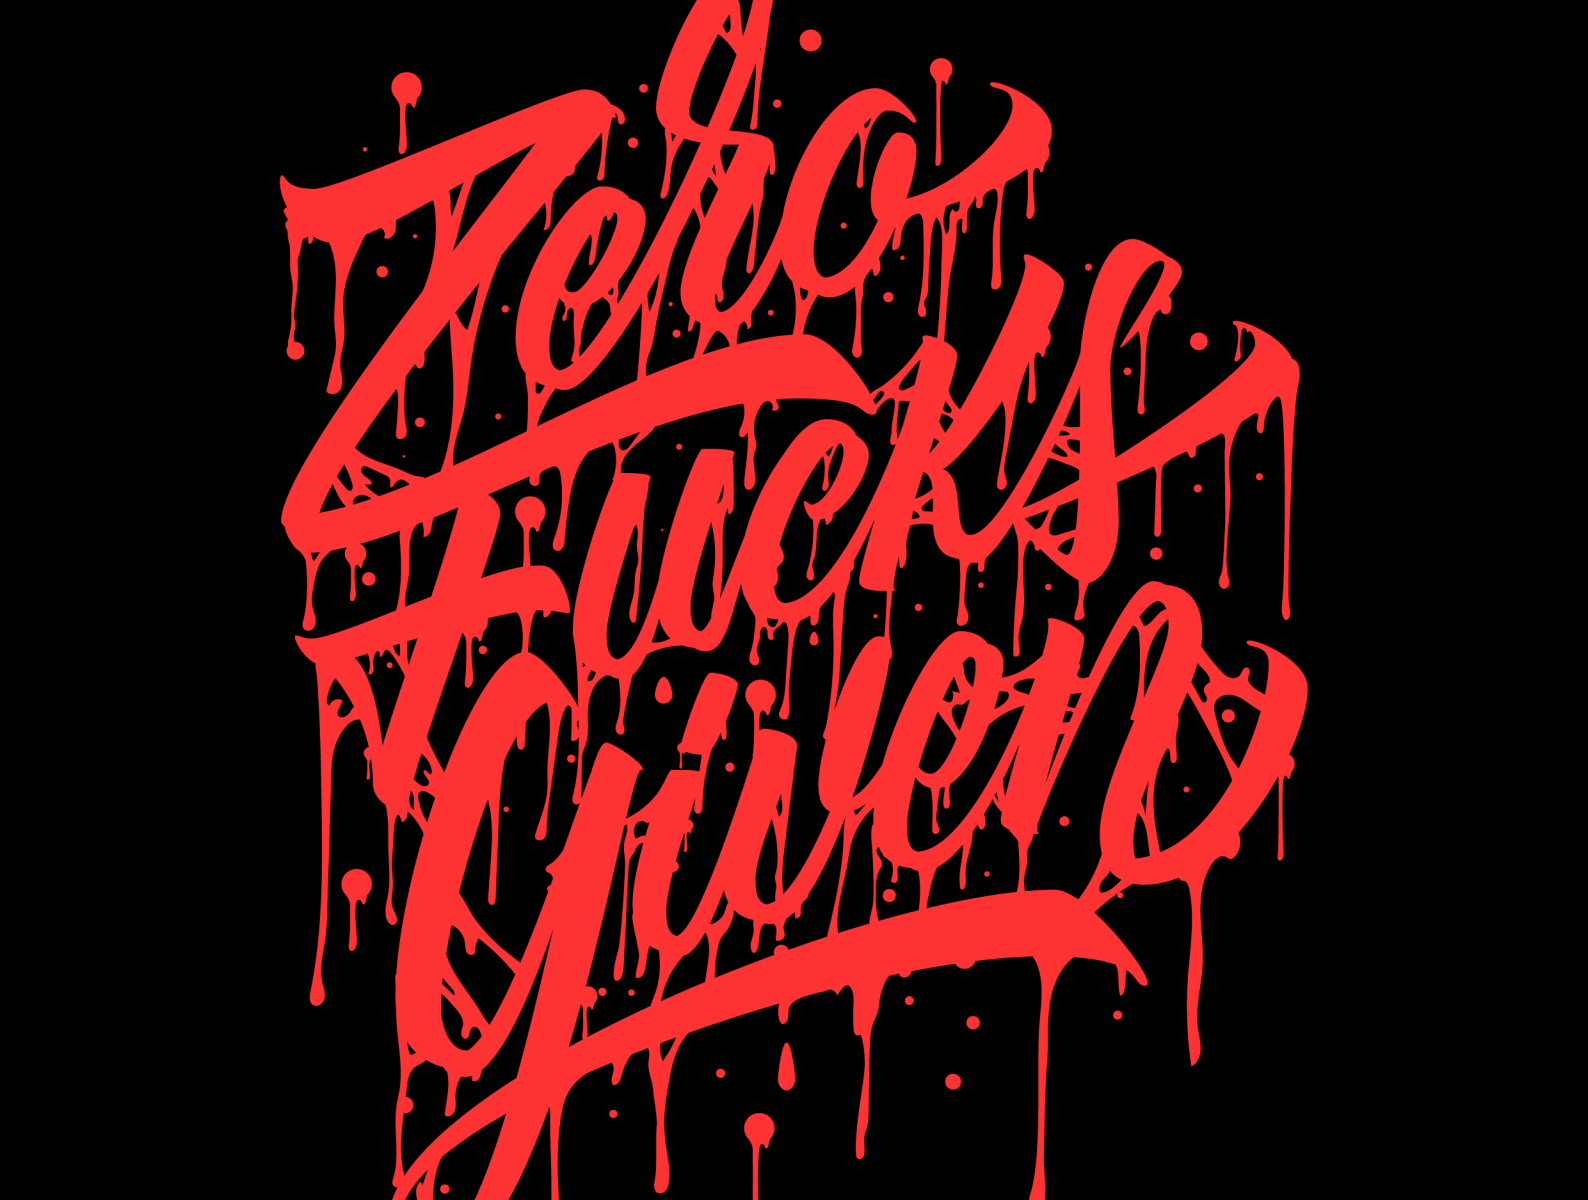 Zero F*ks Given by Roberlan Borges Paresqui on Dribbble